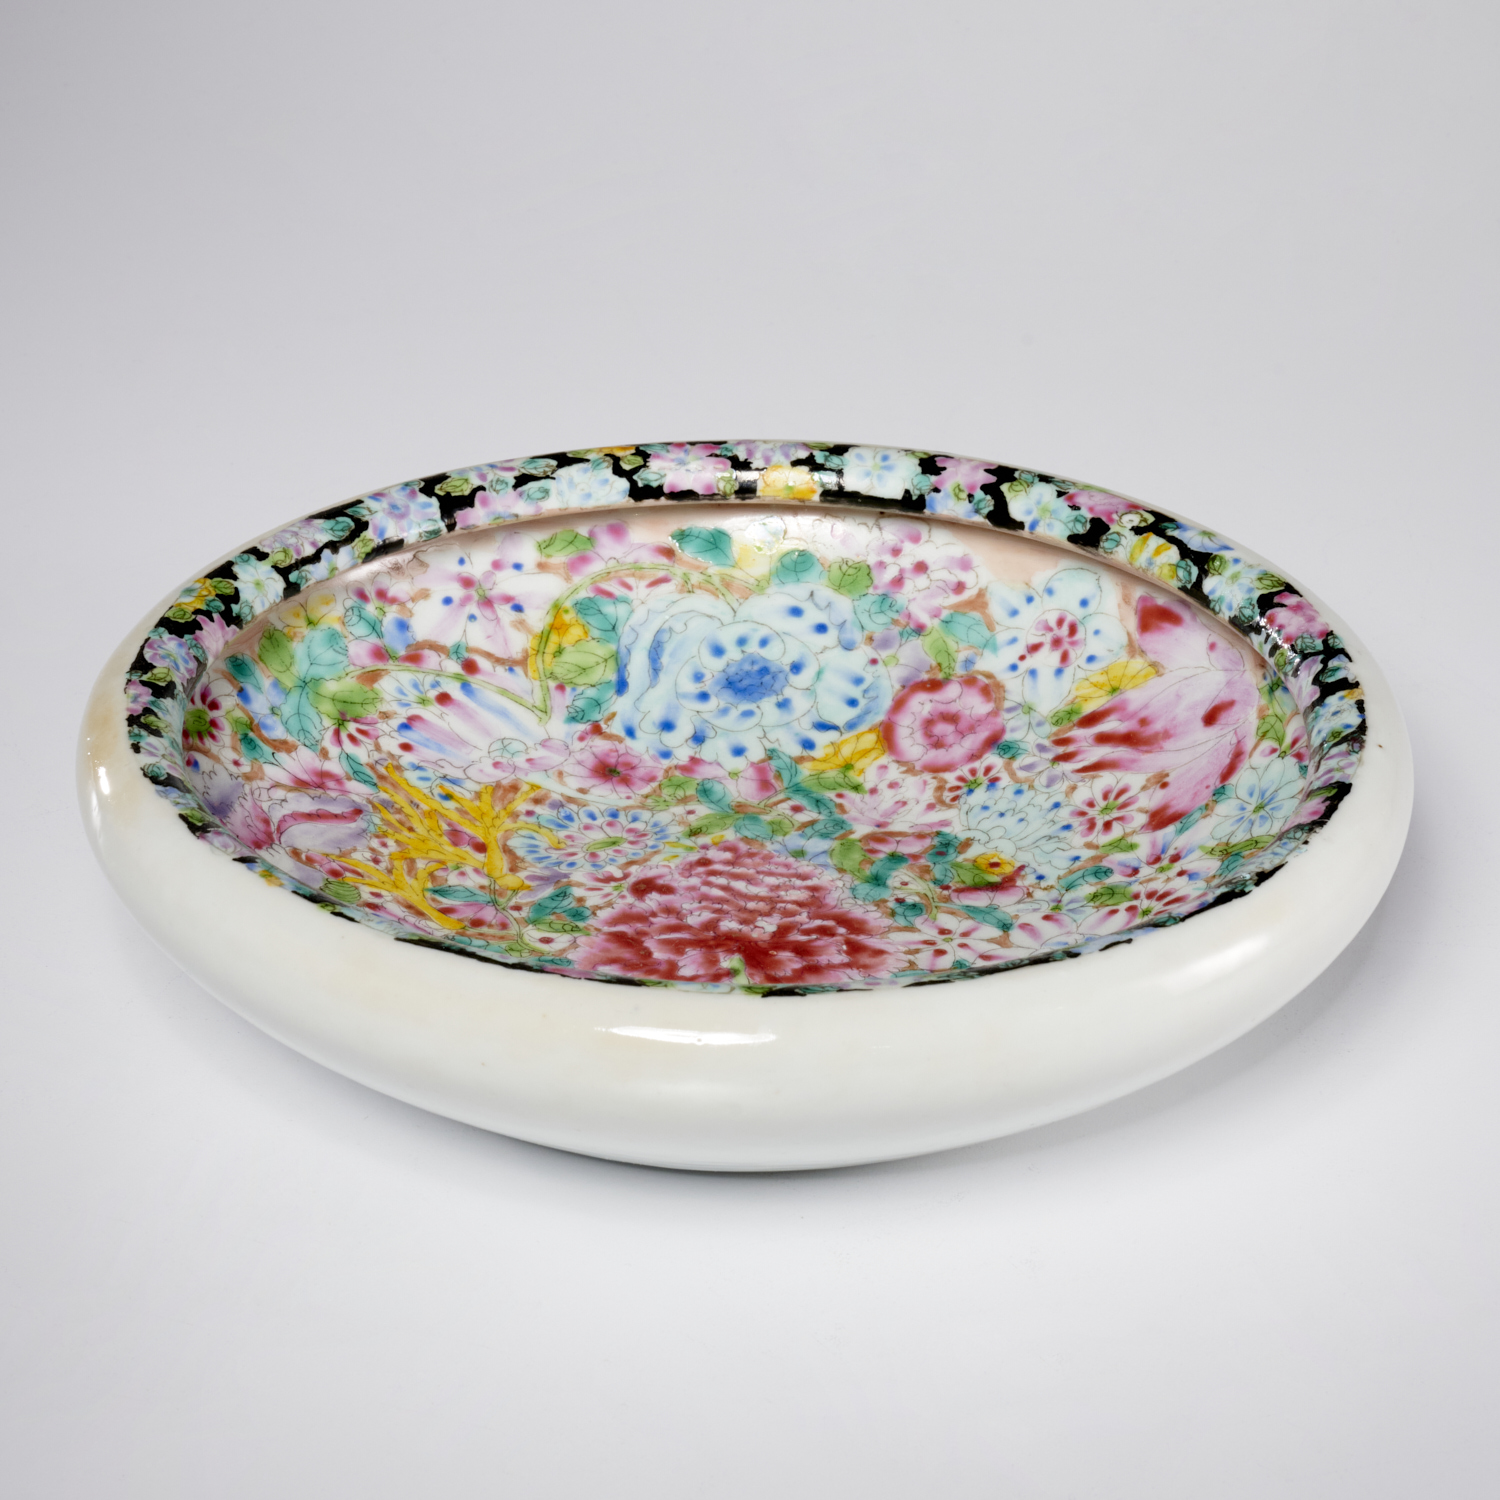 CHINESE MILLEFLEUR PORCELAIN SHALLOW 36092b